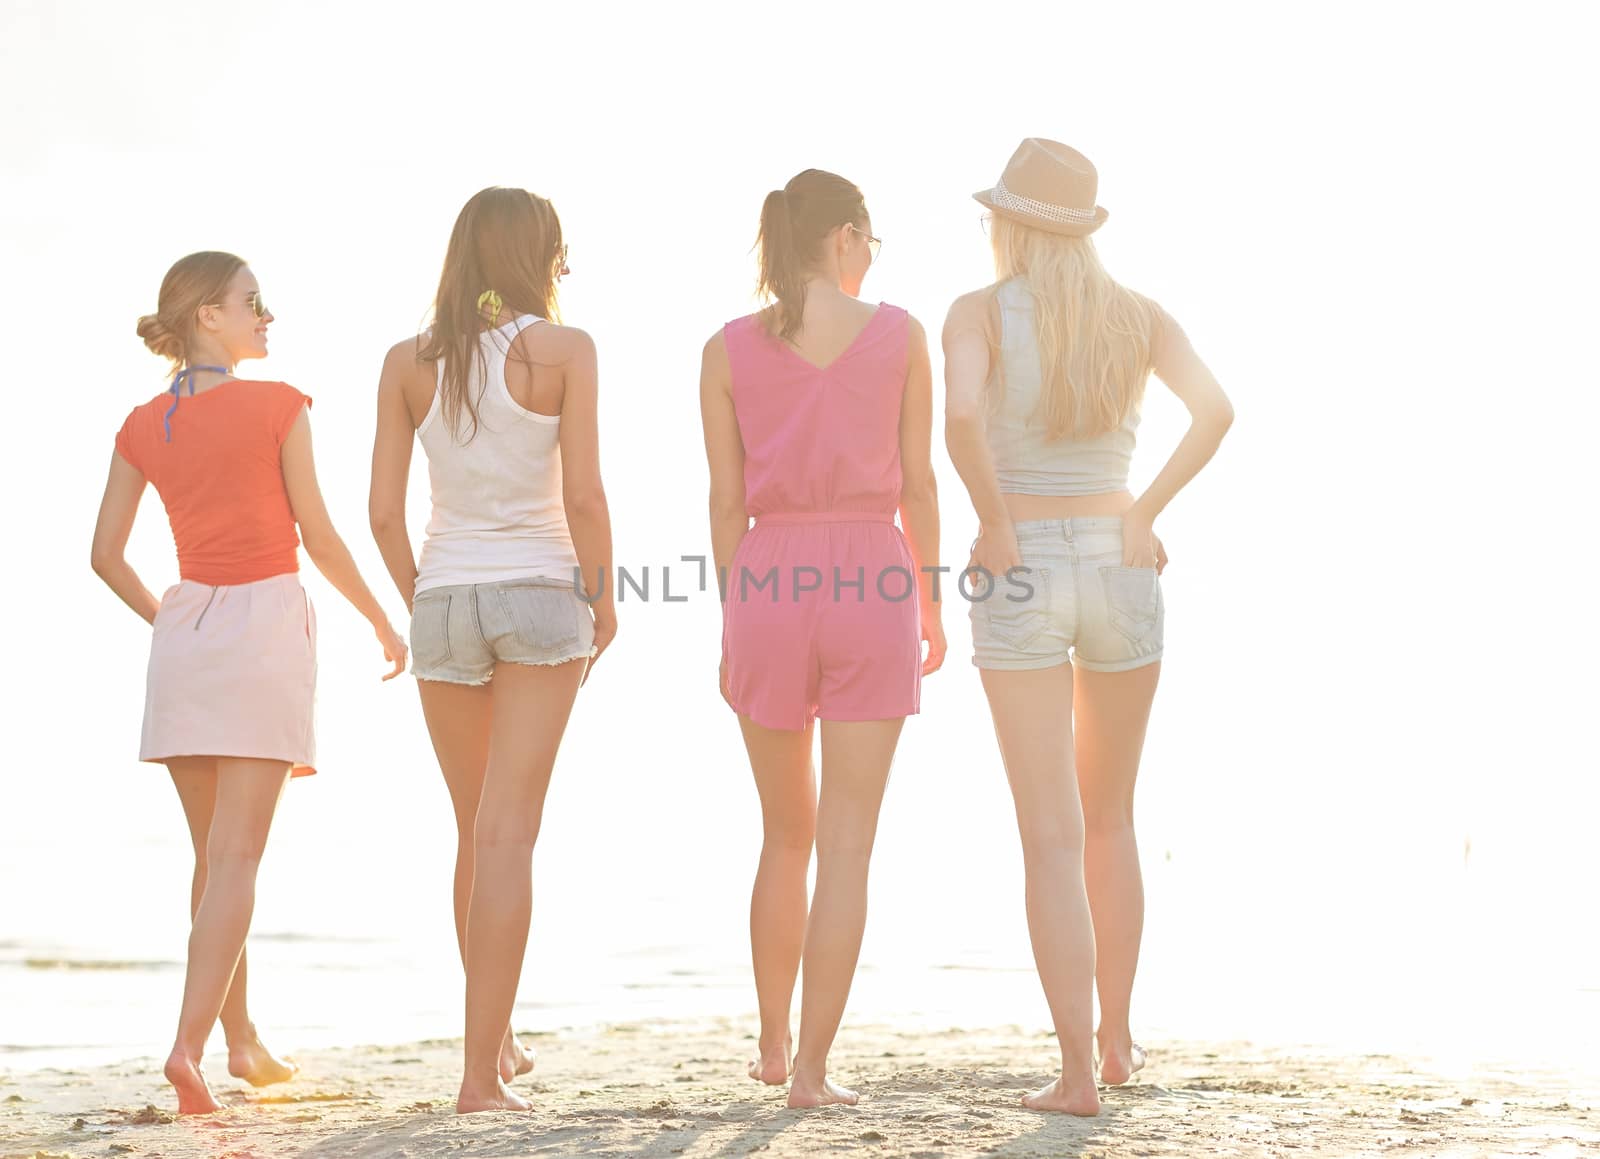 summer vacation, holidays, travel, friendship and people concept - group of young women walking on beach